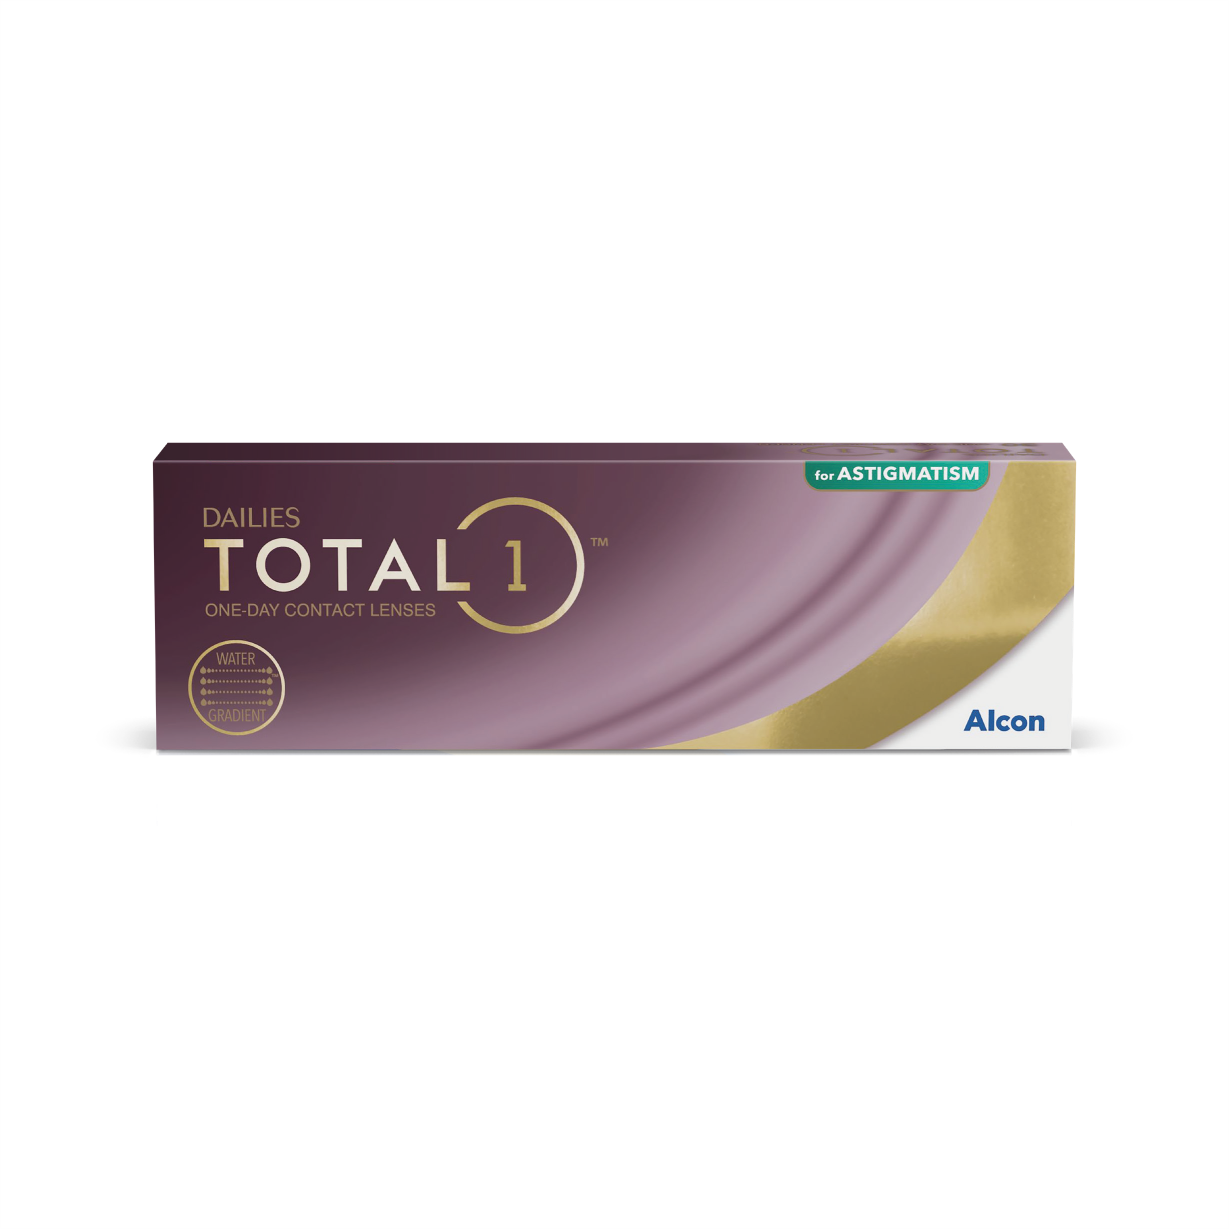 dailies-total1-for-astigmatism-optimed